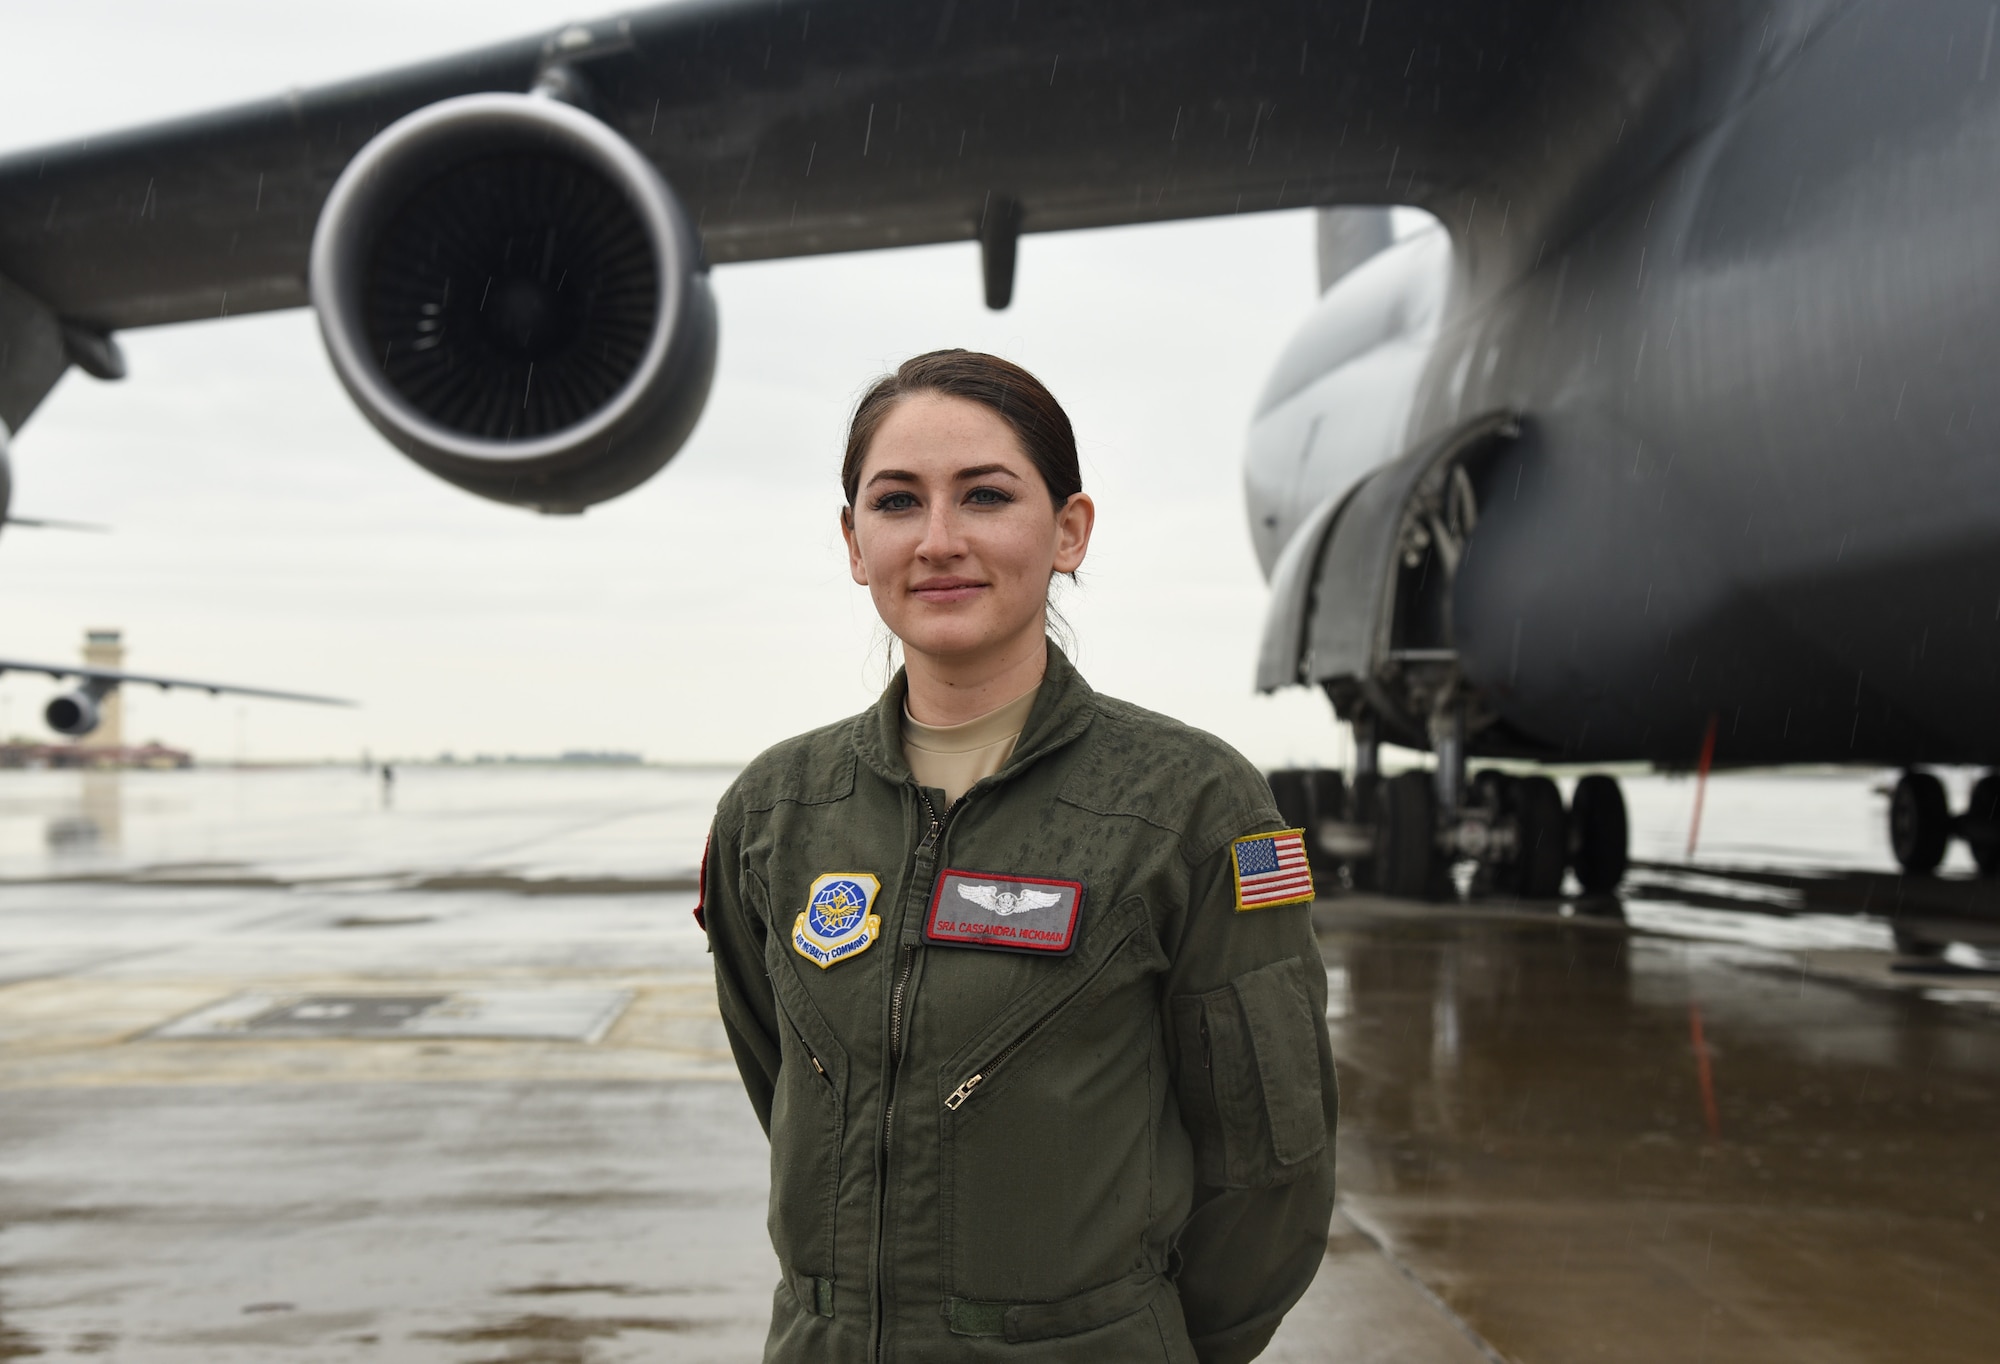 Senior Airman Cassandra Hickman, 22nd Airlift Squadron C-5M Super Galaxy loadmaster, stands in front of a C-5 at Travis Air Force Base, Calif., March 20, 2017. Hickman was the first female in her family to join the military. (U.S. Air Force photo by Senior Airman Sam Salopek)